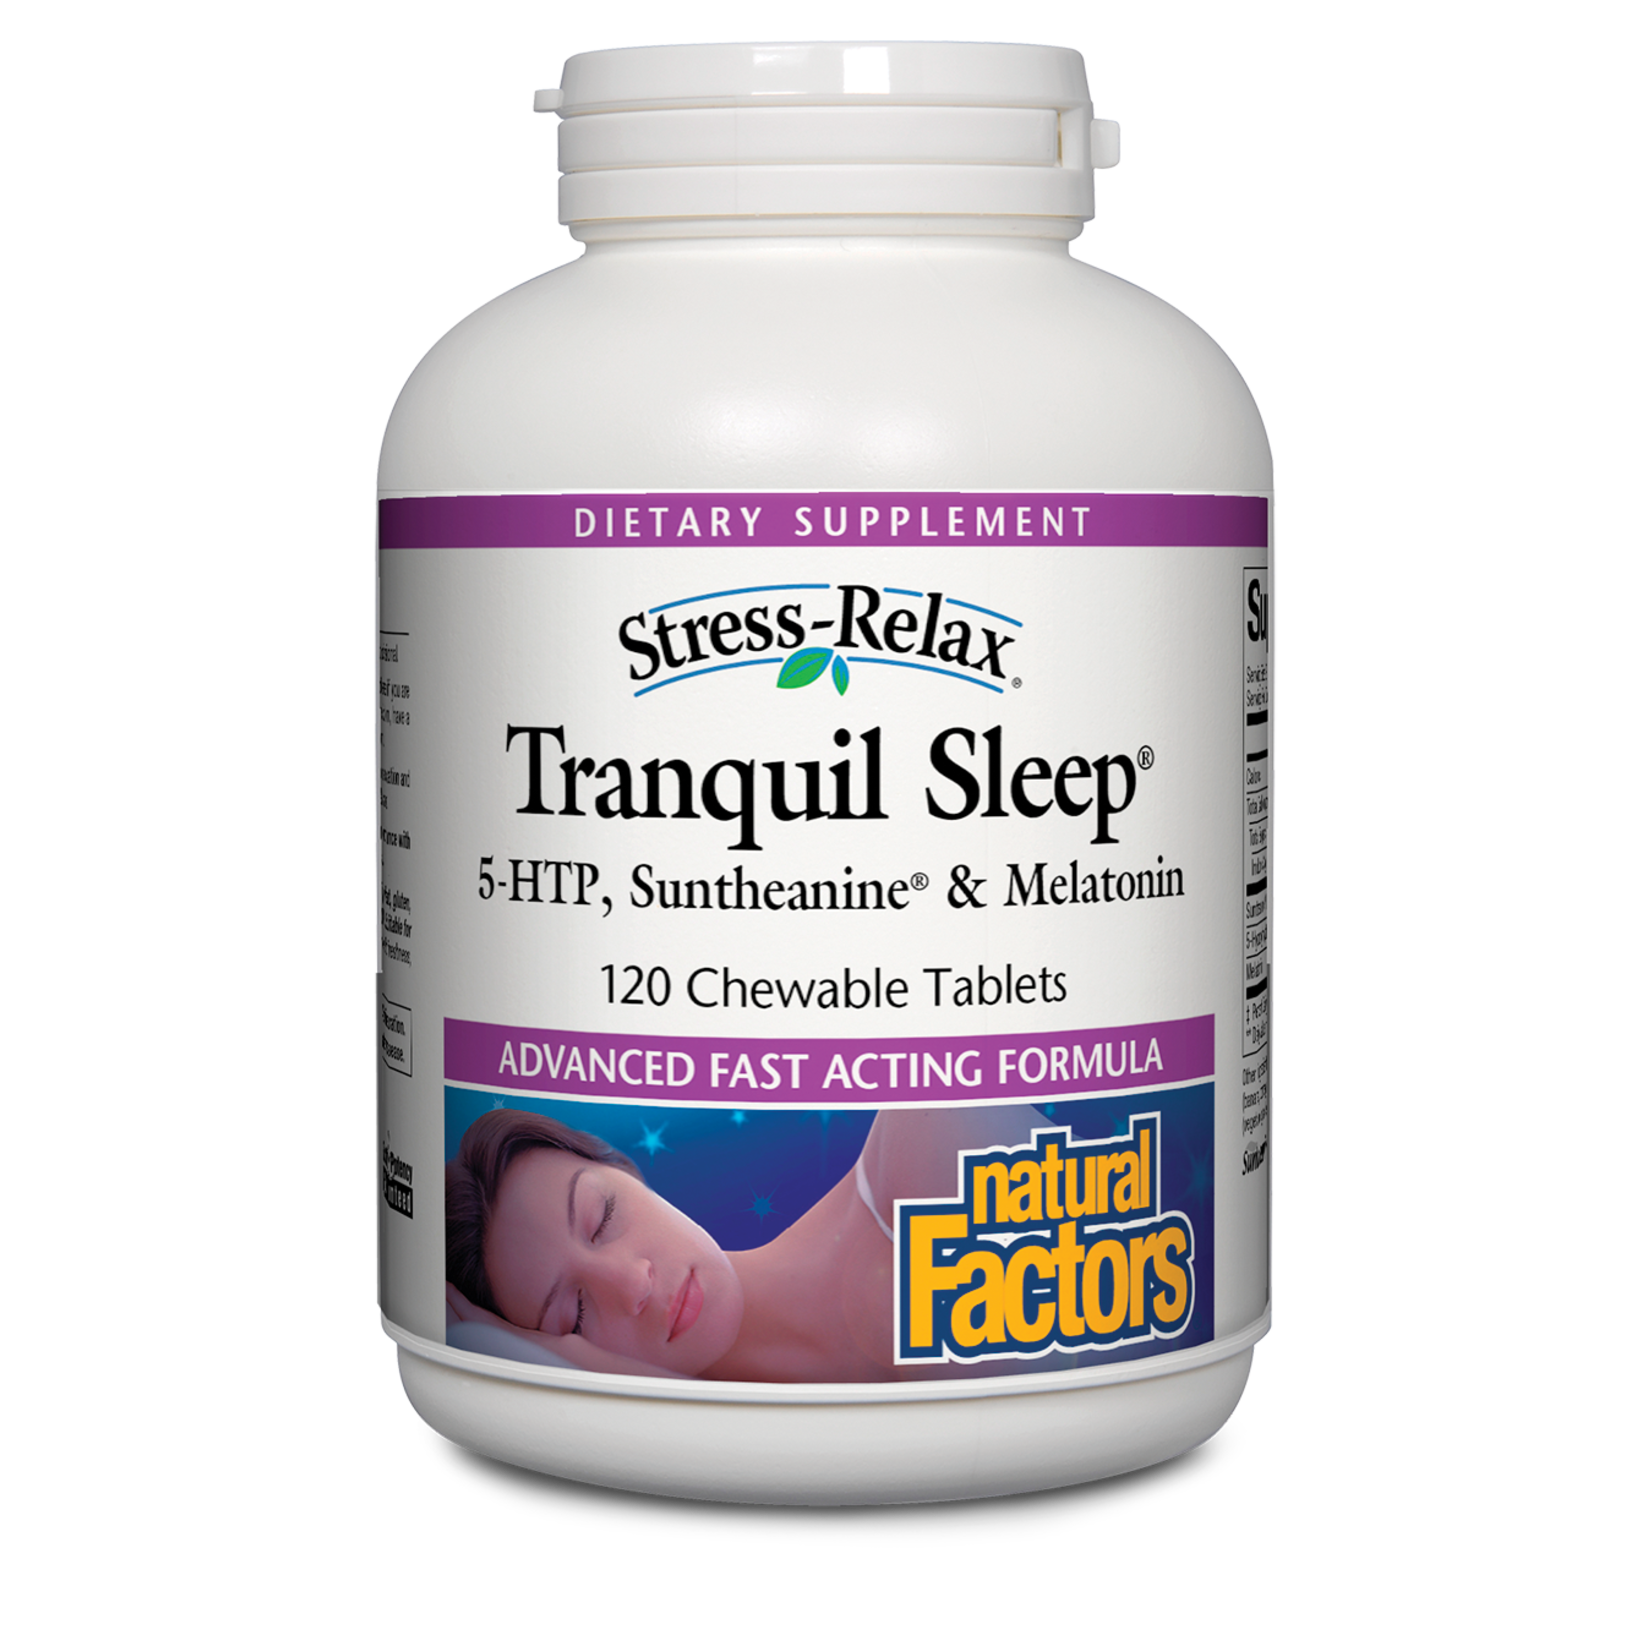 Natural Factors Natural Factors - Stress-Relax Tranquil Sleep Chewable - 120 Tablets